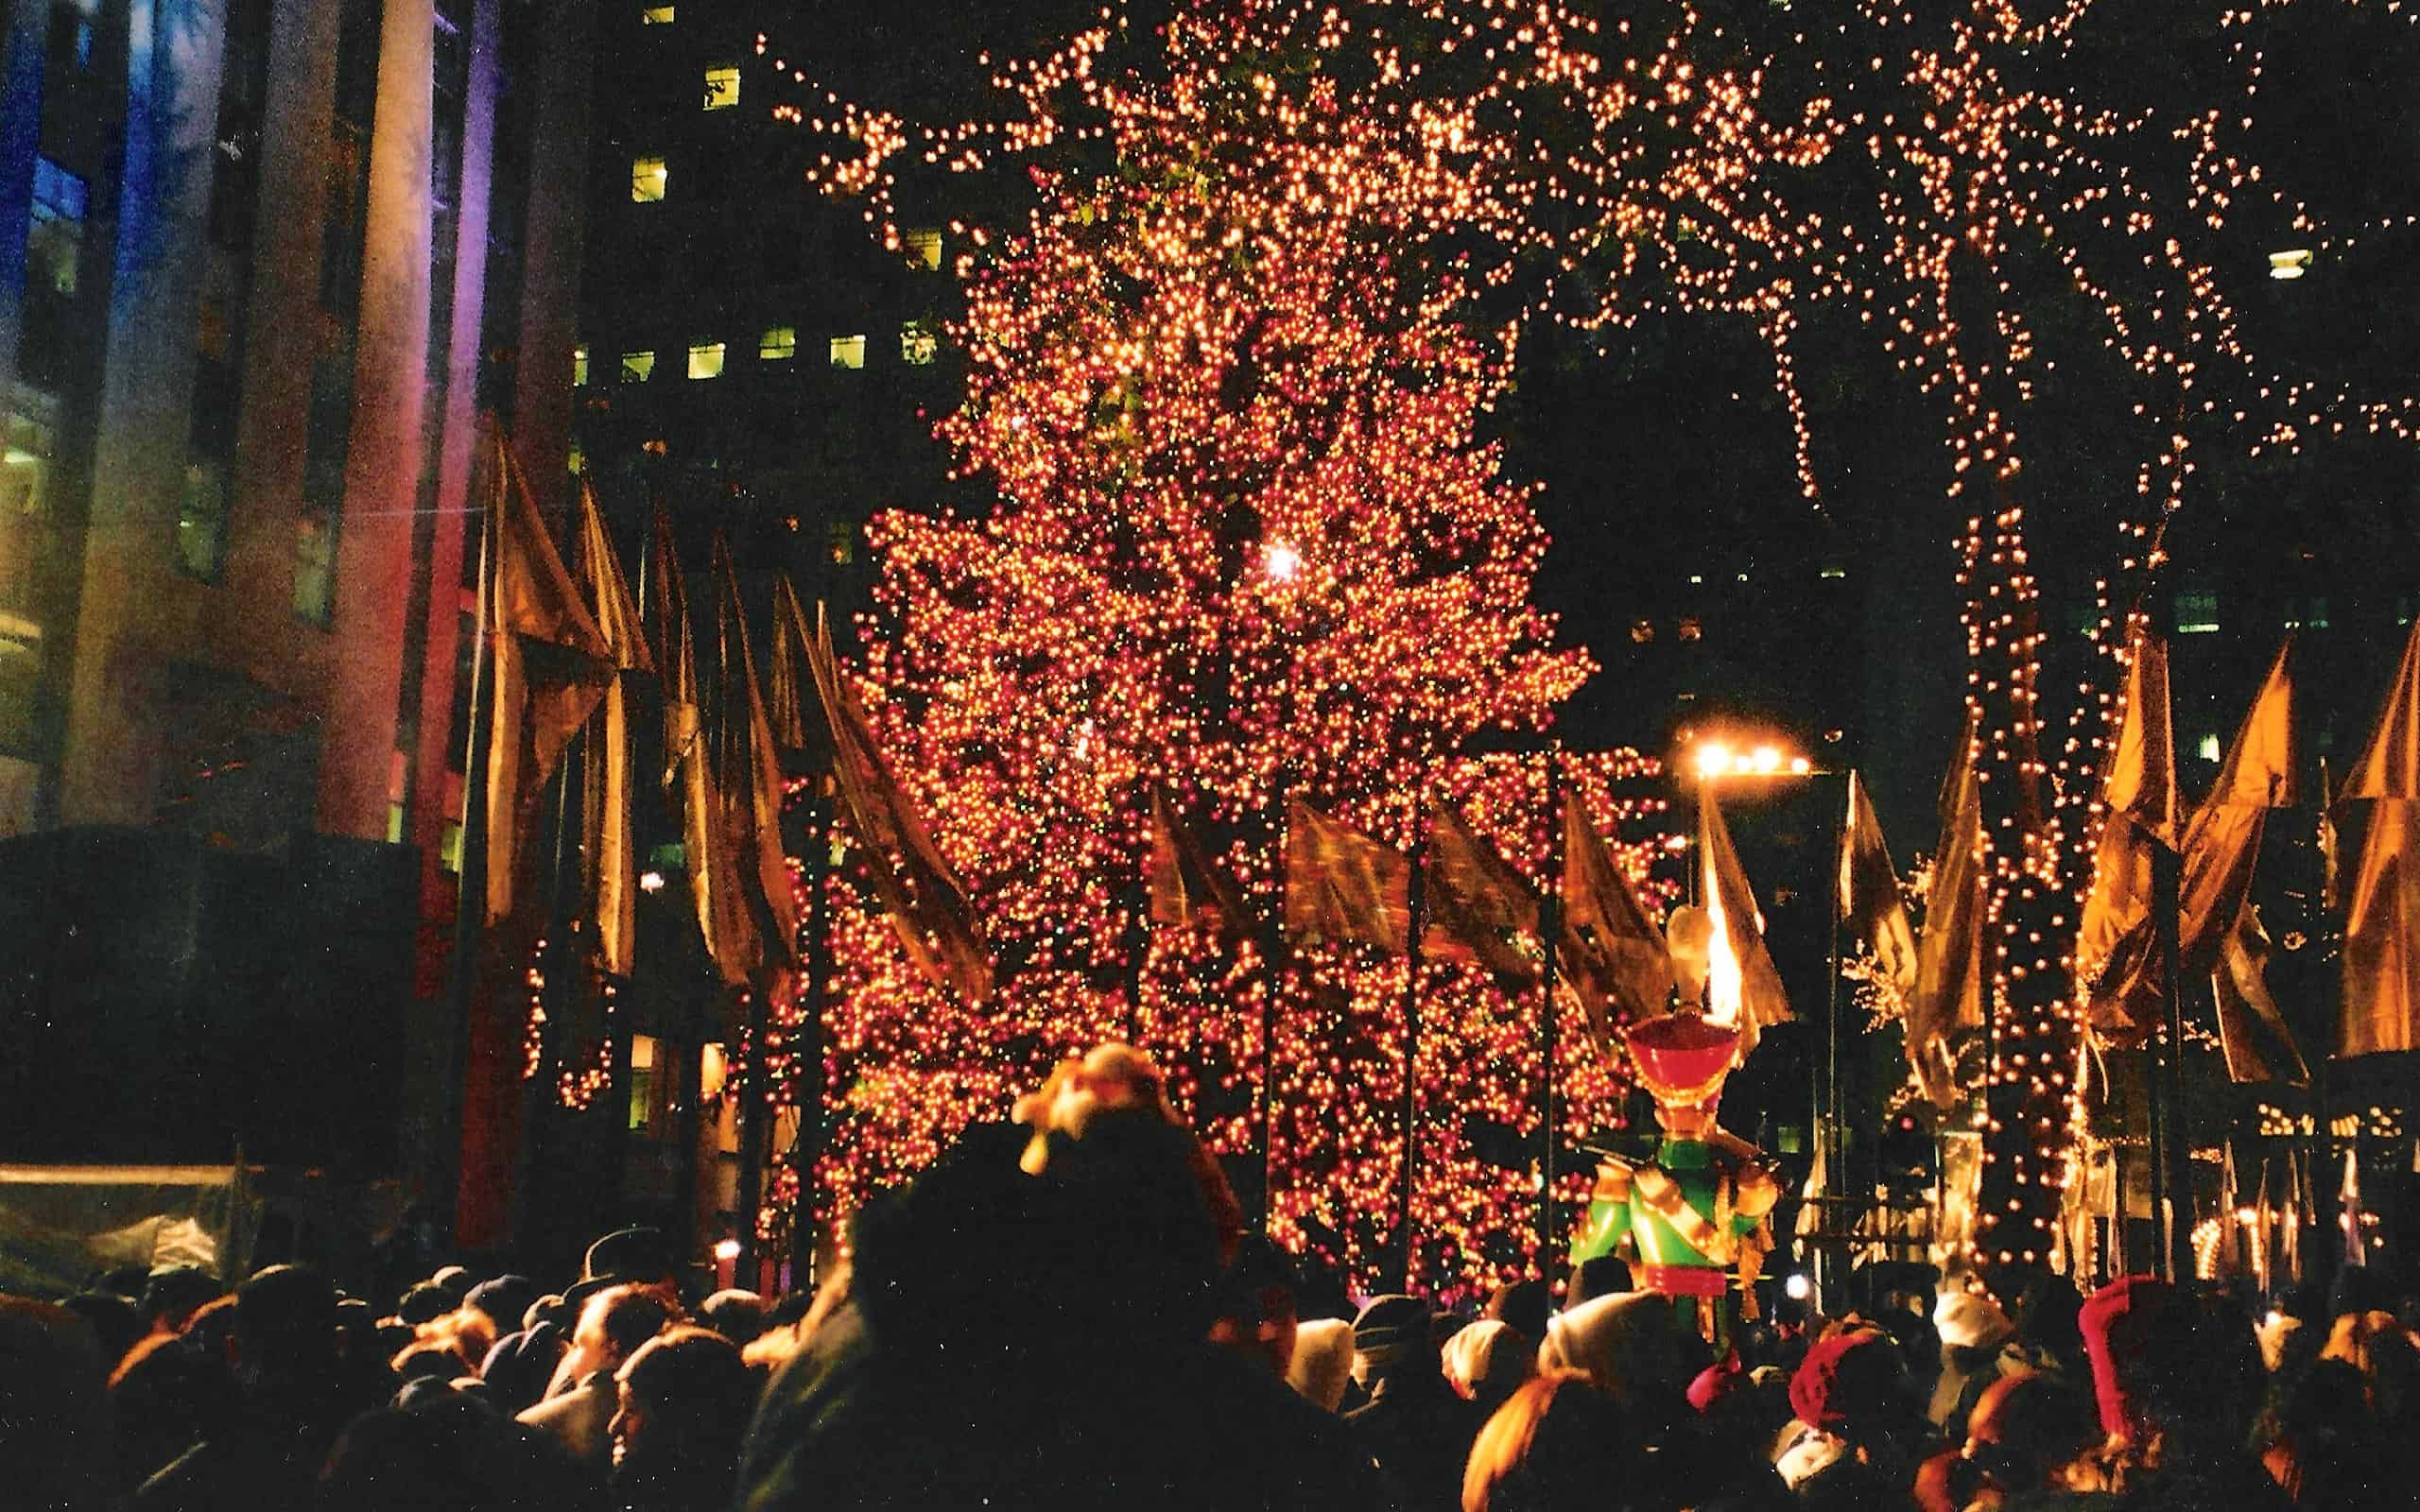 People enjoying the festivities around the unveiling of the Christmas Tree at Rockefeller Center, right after Thanksgiving.